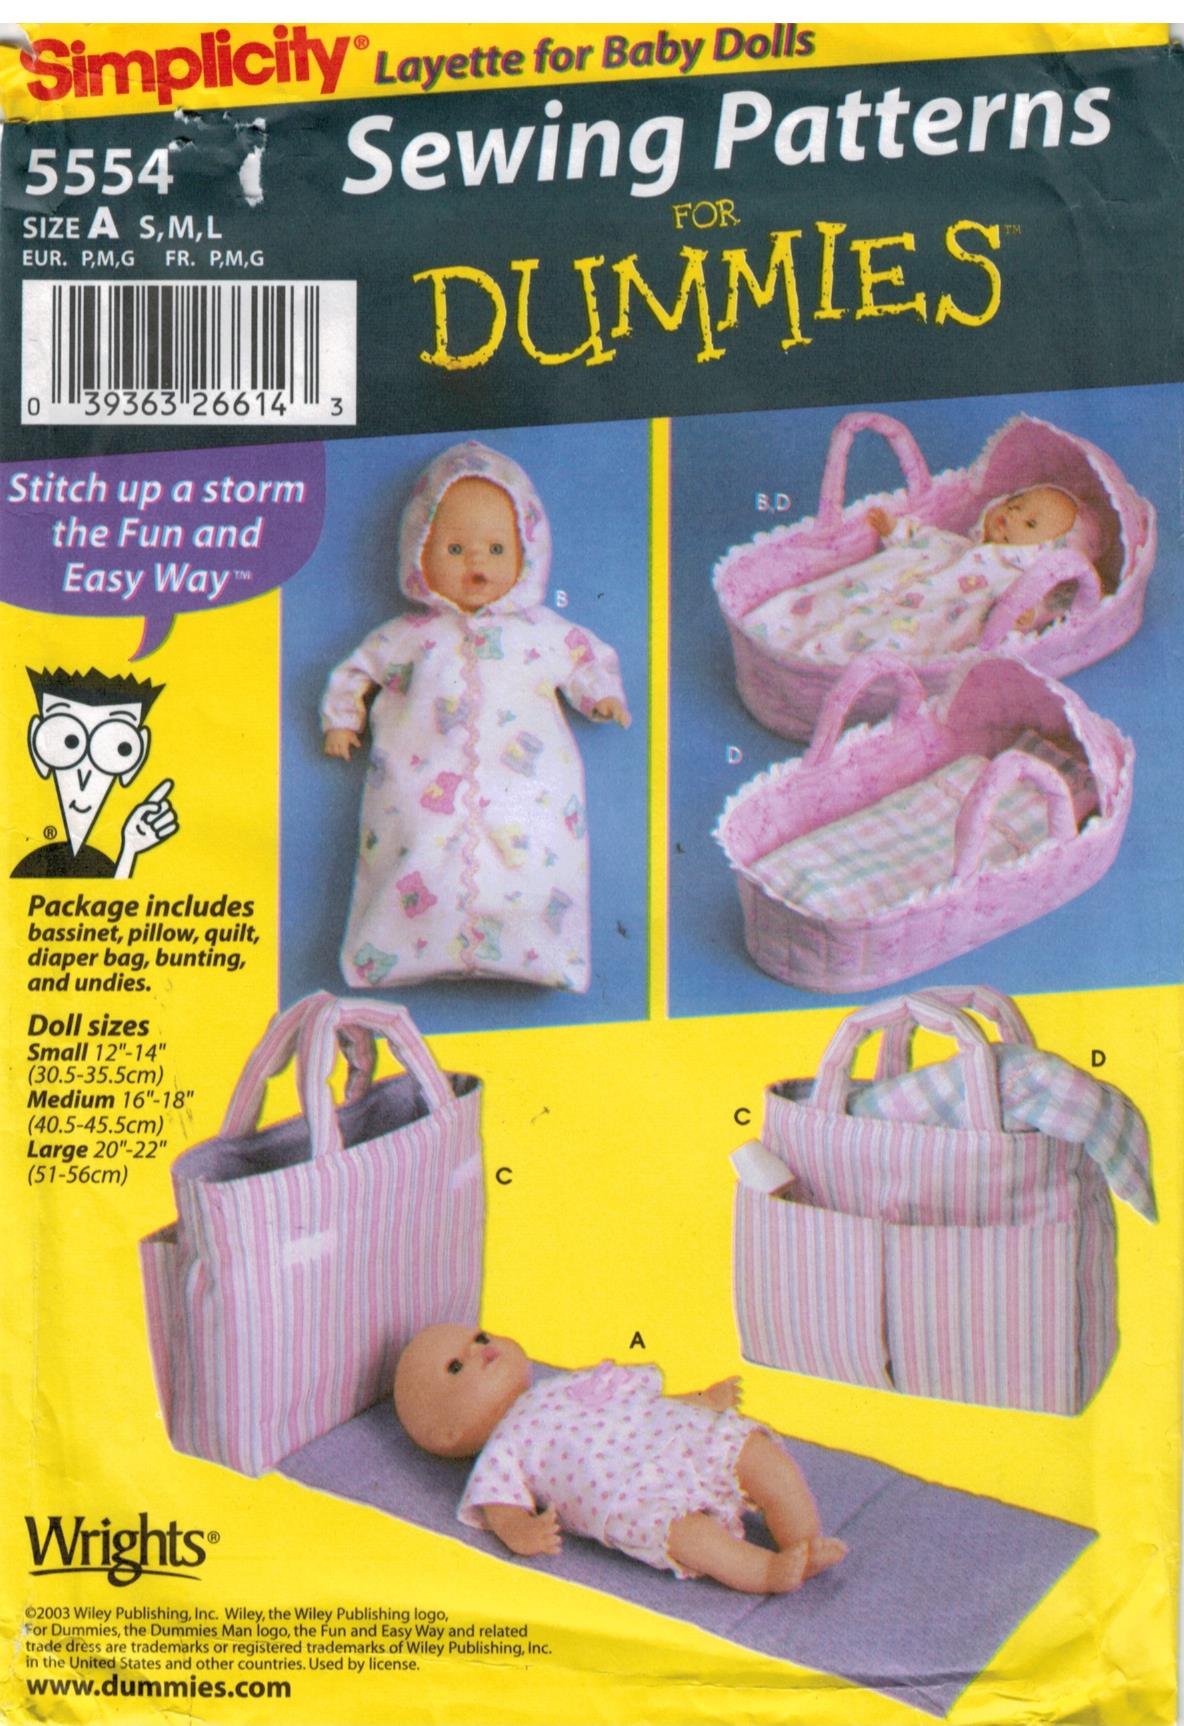 Simplicity Pattern 5554 Sewing Patterns for Dummies Doll Bassinet